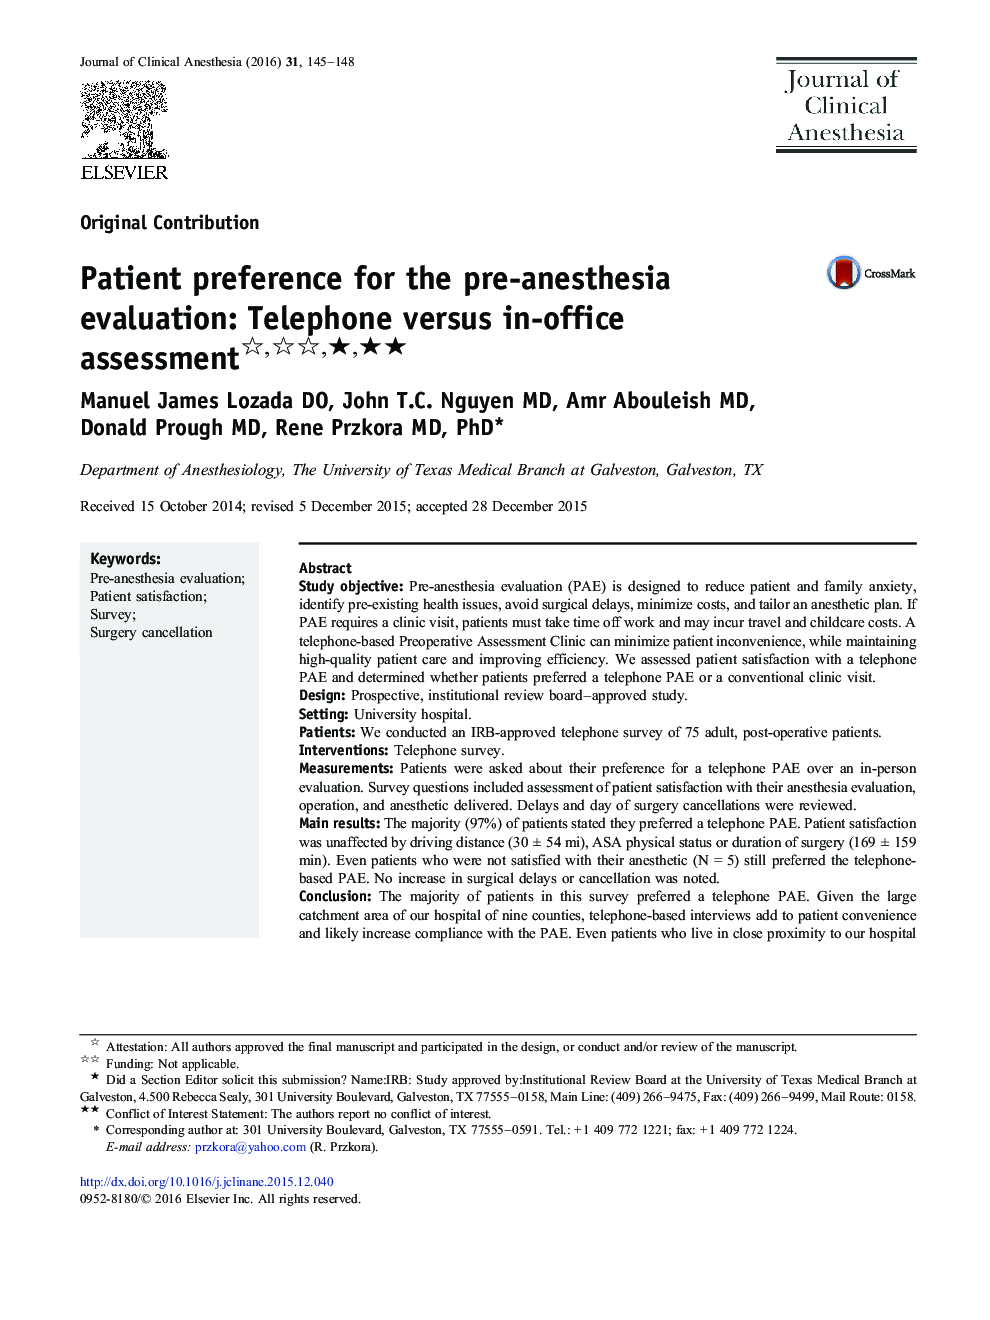 Patient preference for the pre-anesthesia evaluation: Telephone versus in-office assessment